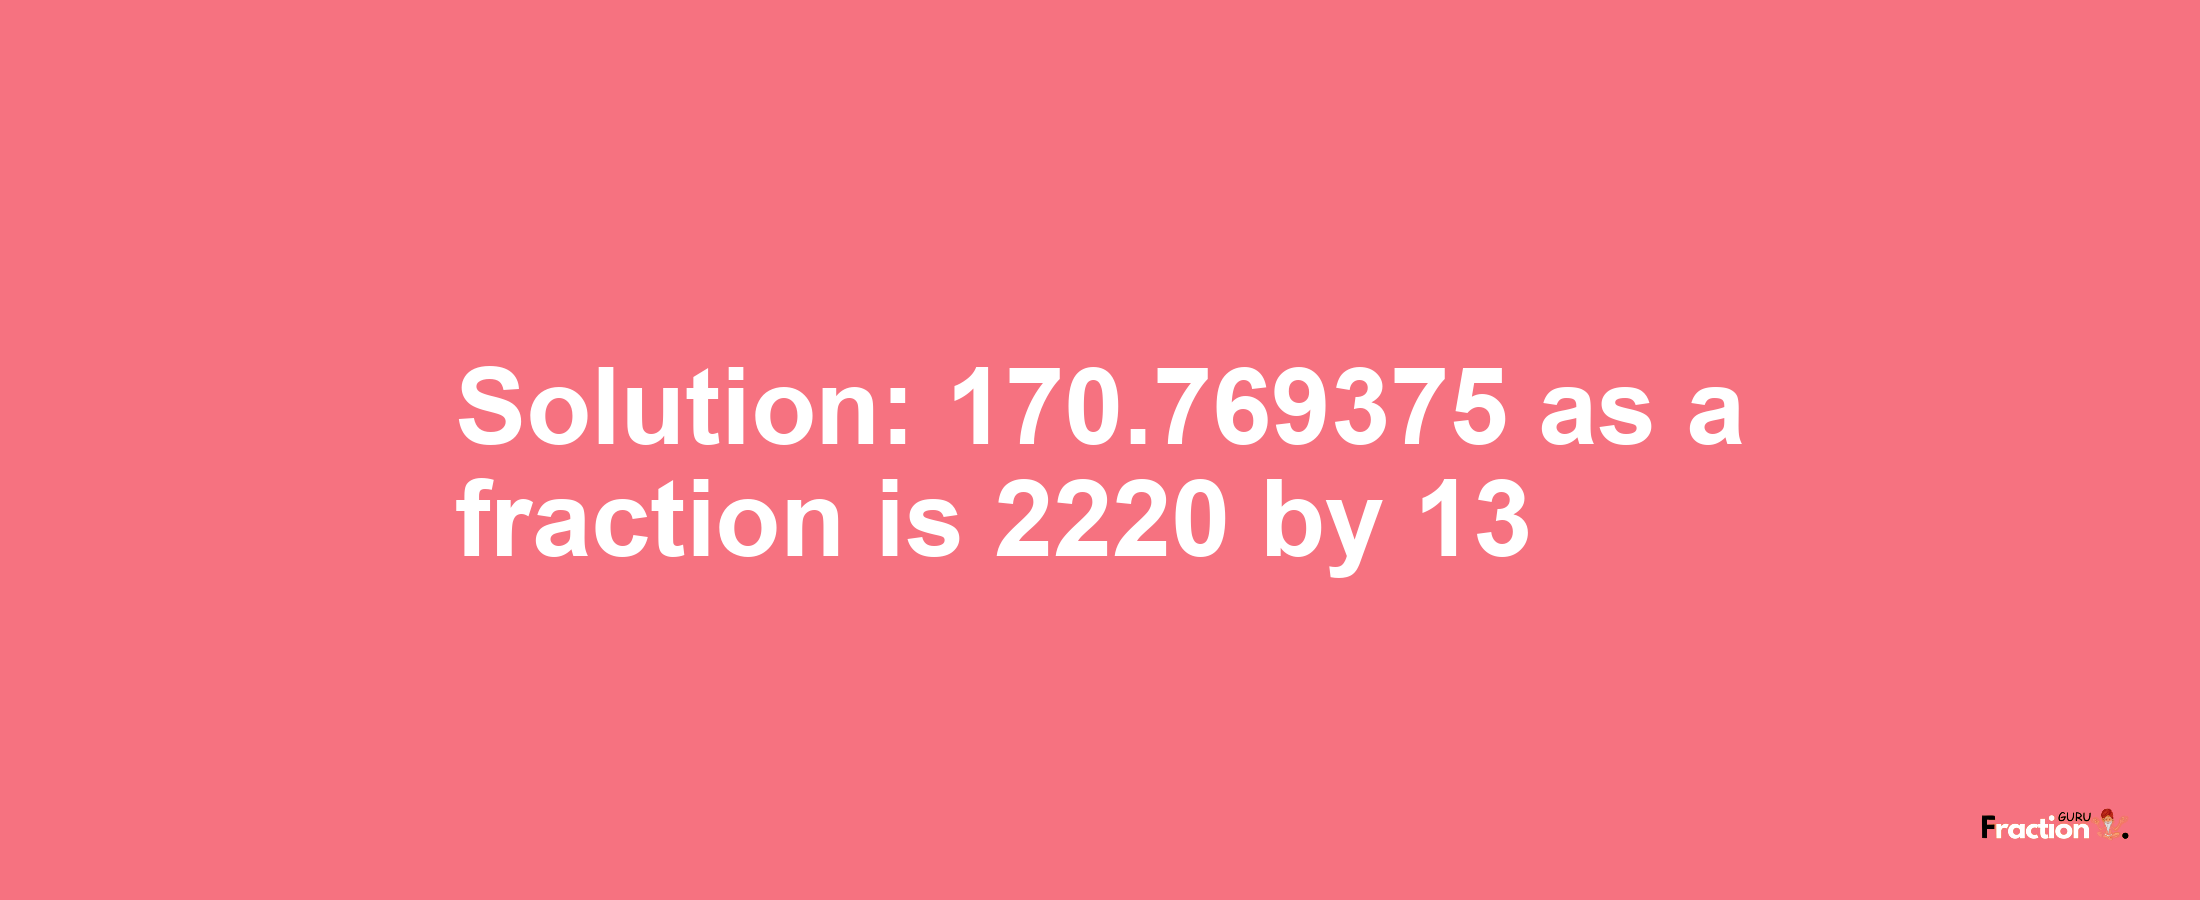 Solution:170.769375 as a fraction is 2220/13